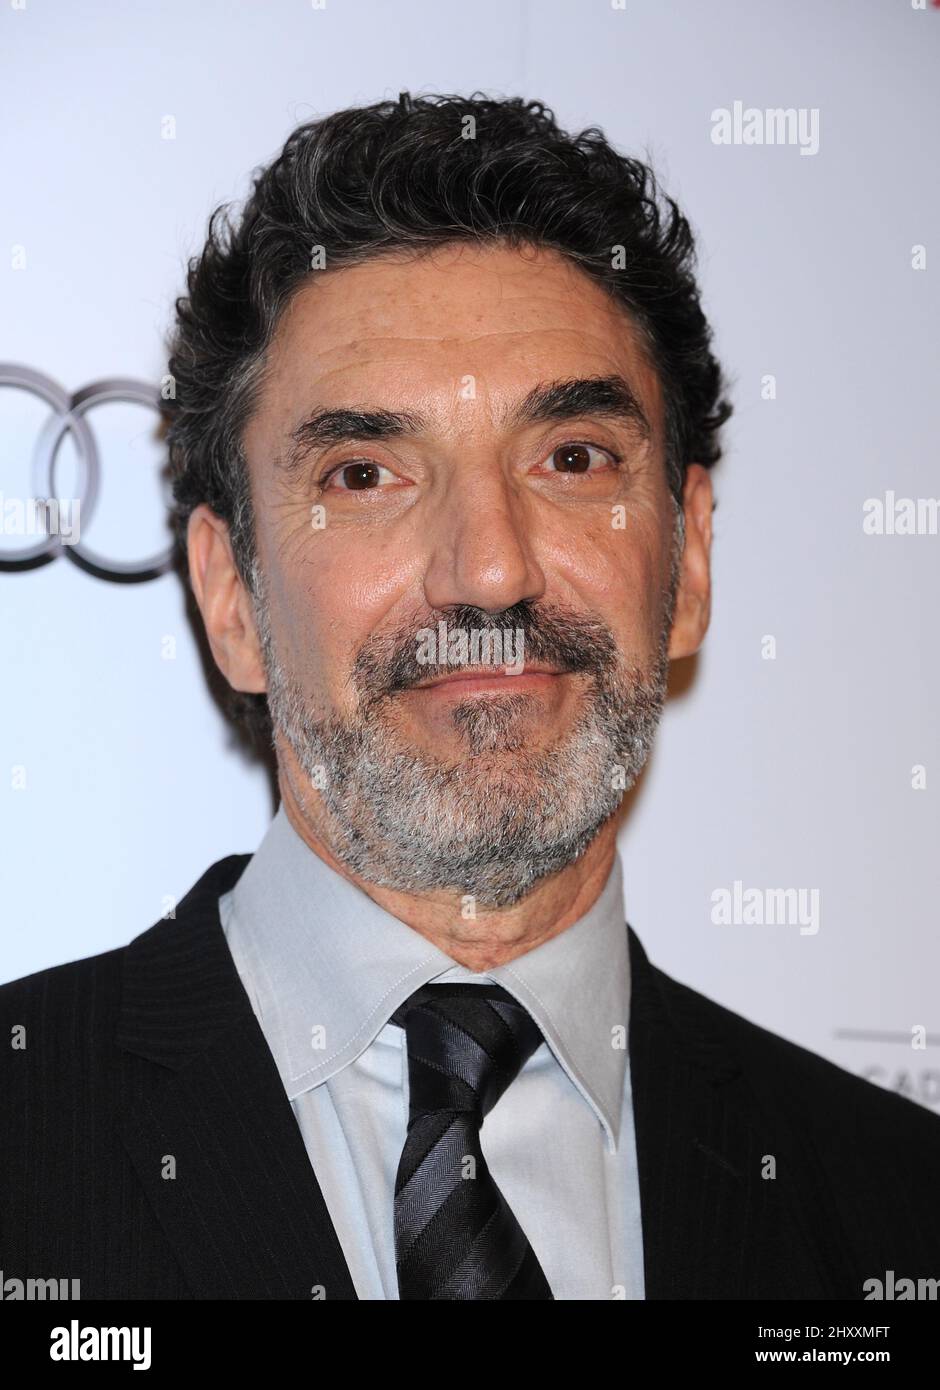 Chuck Lorre attending the Academy of Television Arts & Sciences 21st Annual Hall of Fame Ceremony held at the Beverly Hilton Hotel in Los Angeles, USA. Stock Photo